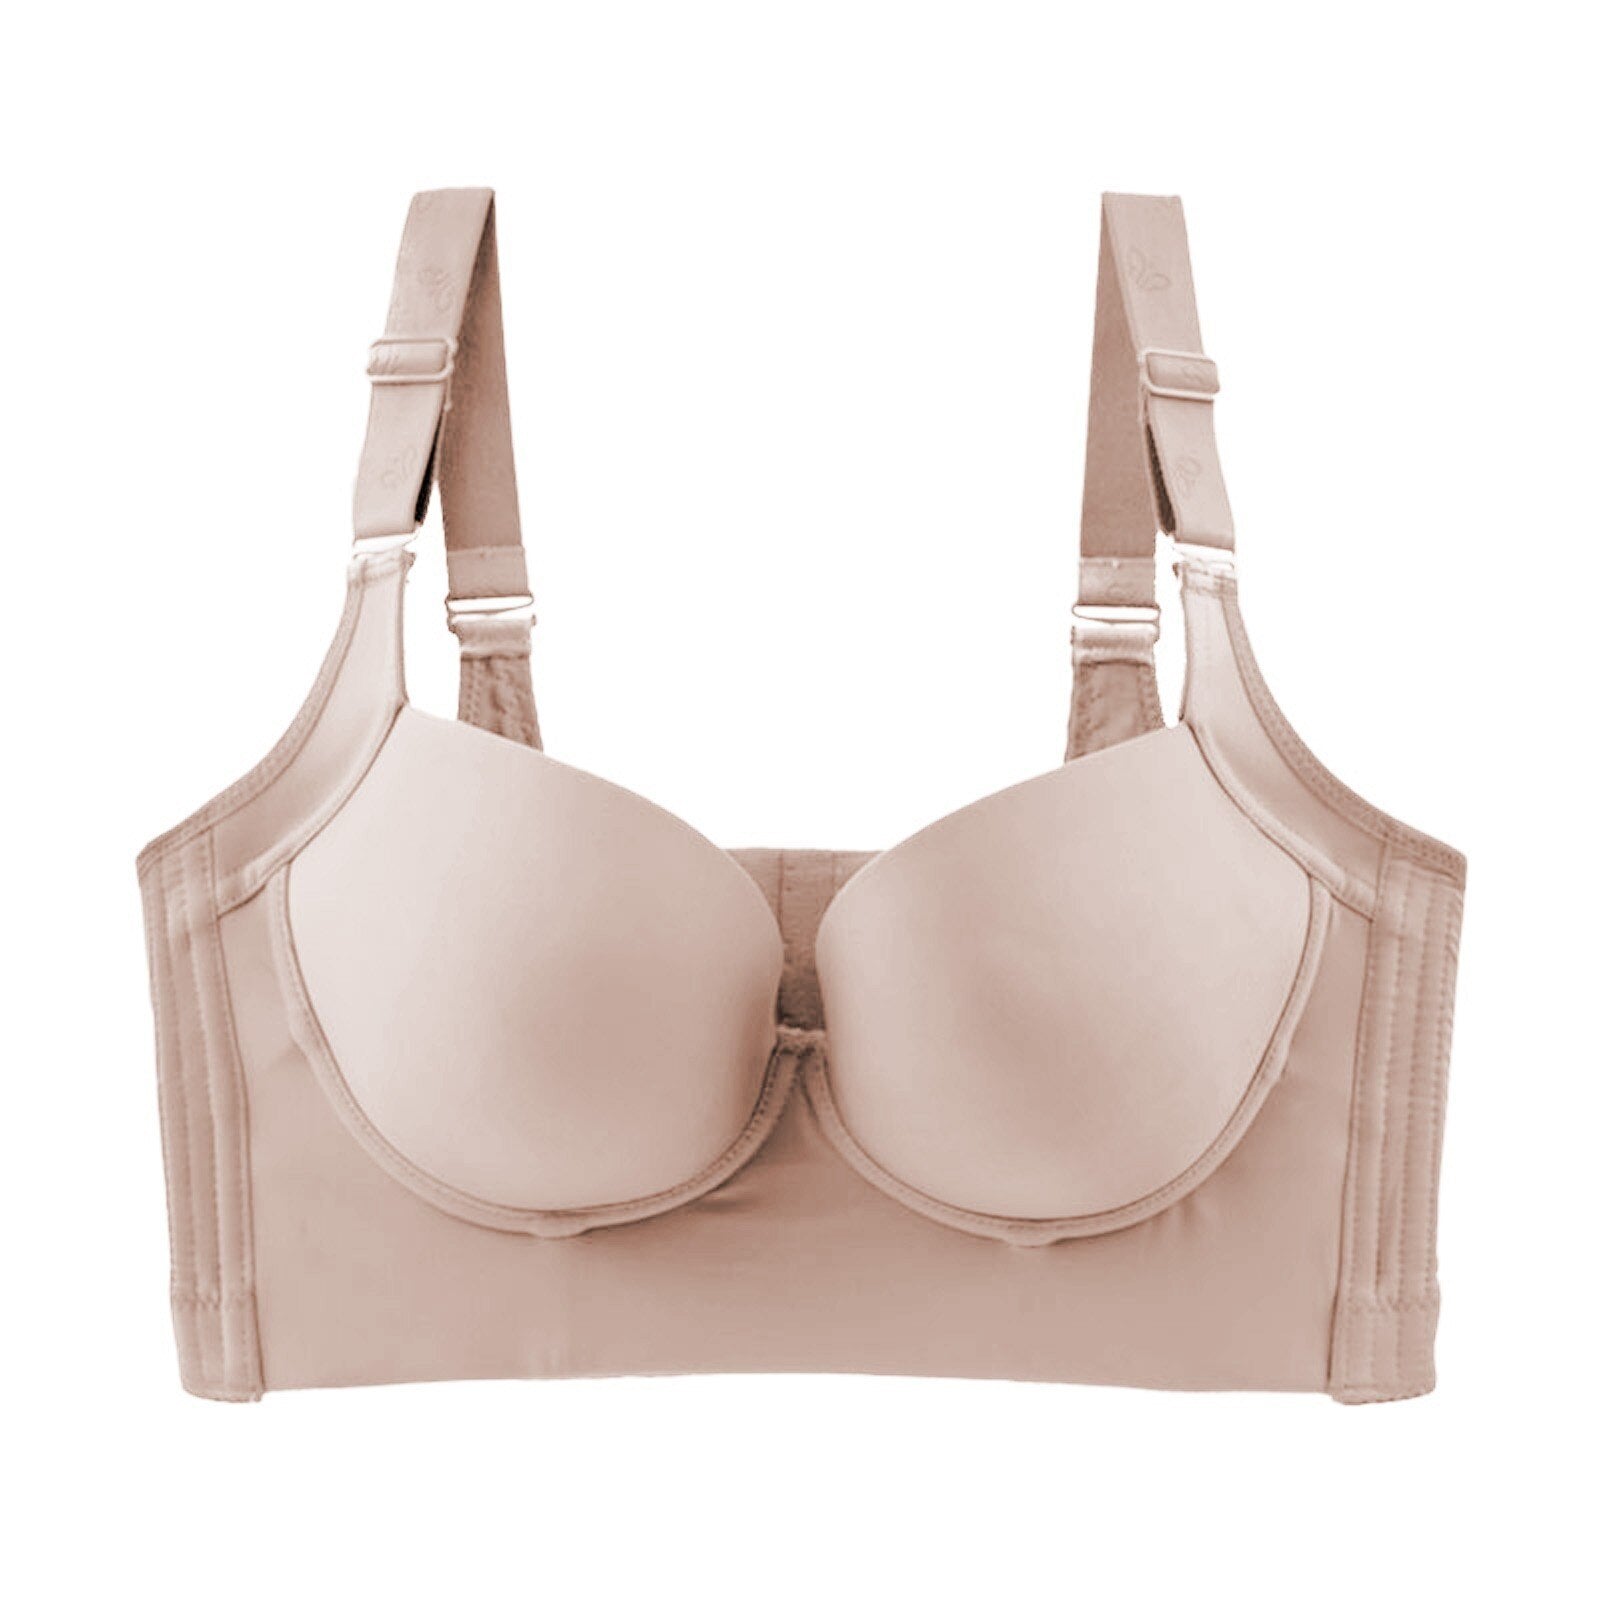 Full-back Coverage Bra ✨ Hides Back Fat & Side Bra Rolls with Shapewear. All sizes!